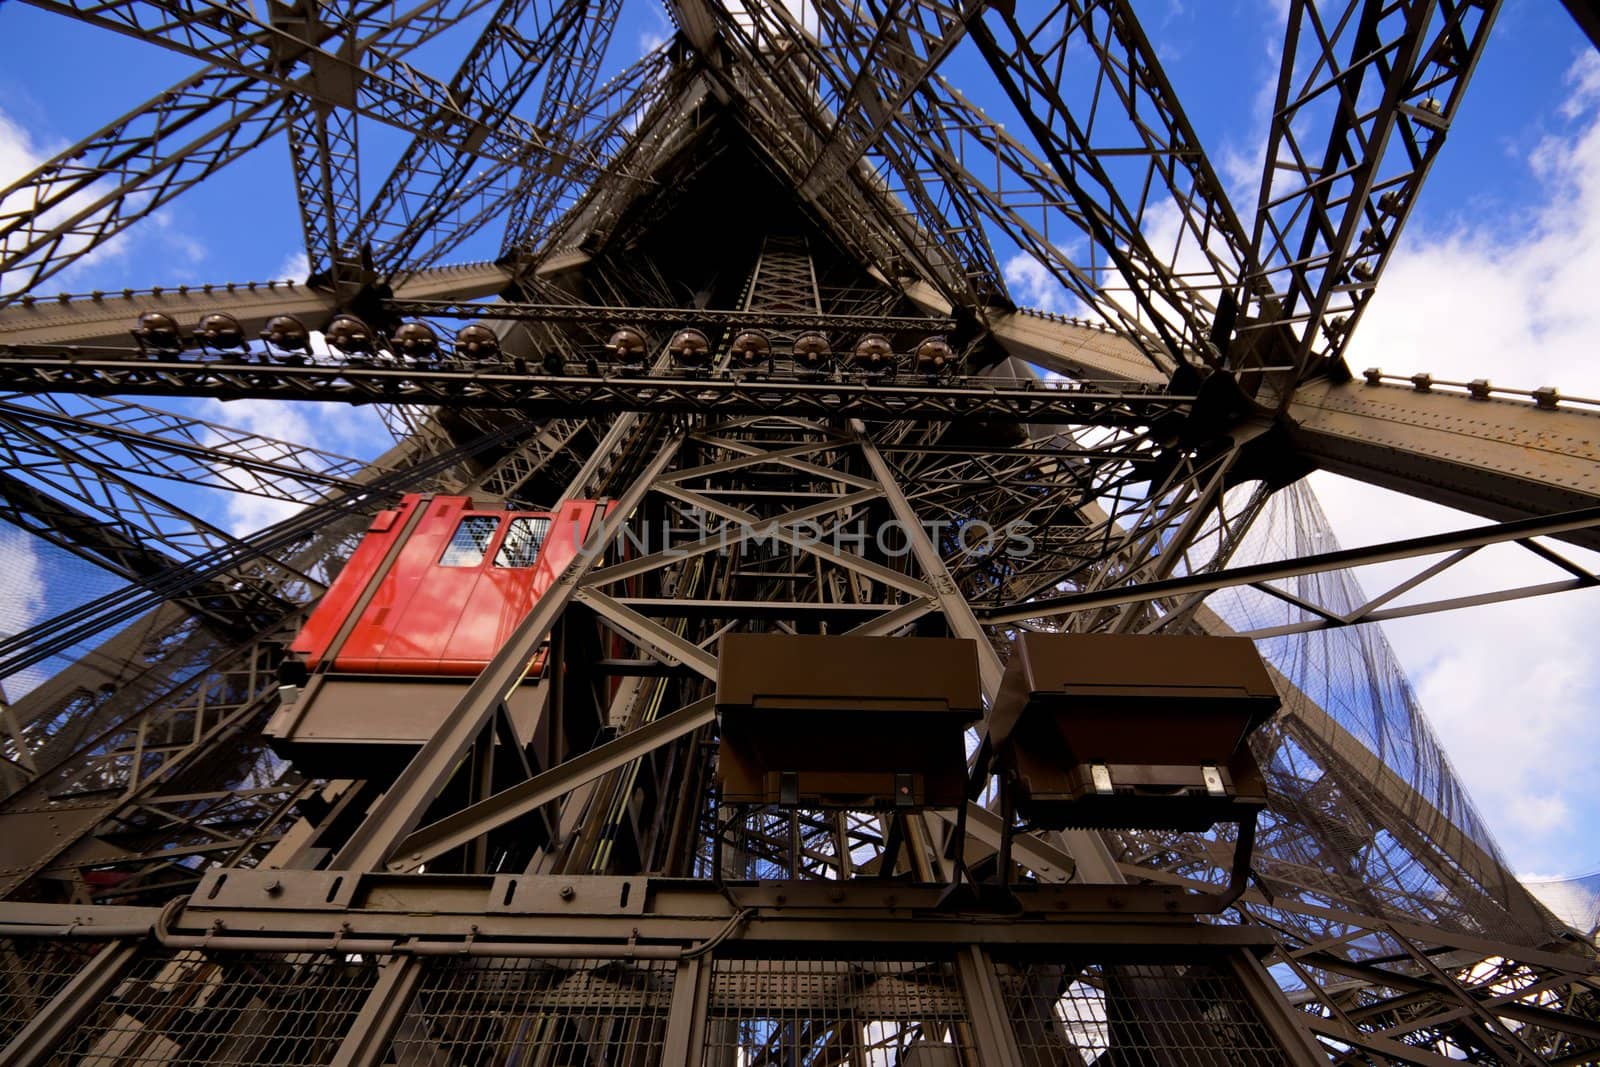 Lifts on Eiffel Tower by Harvepino